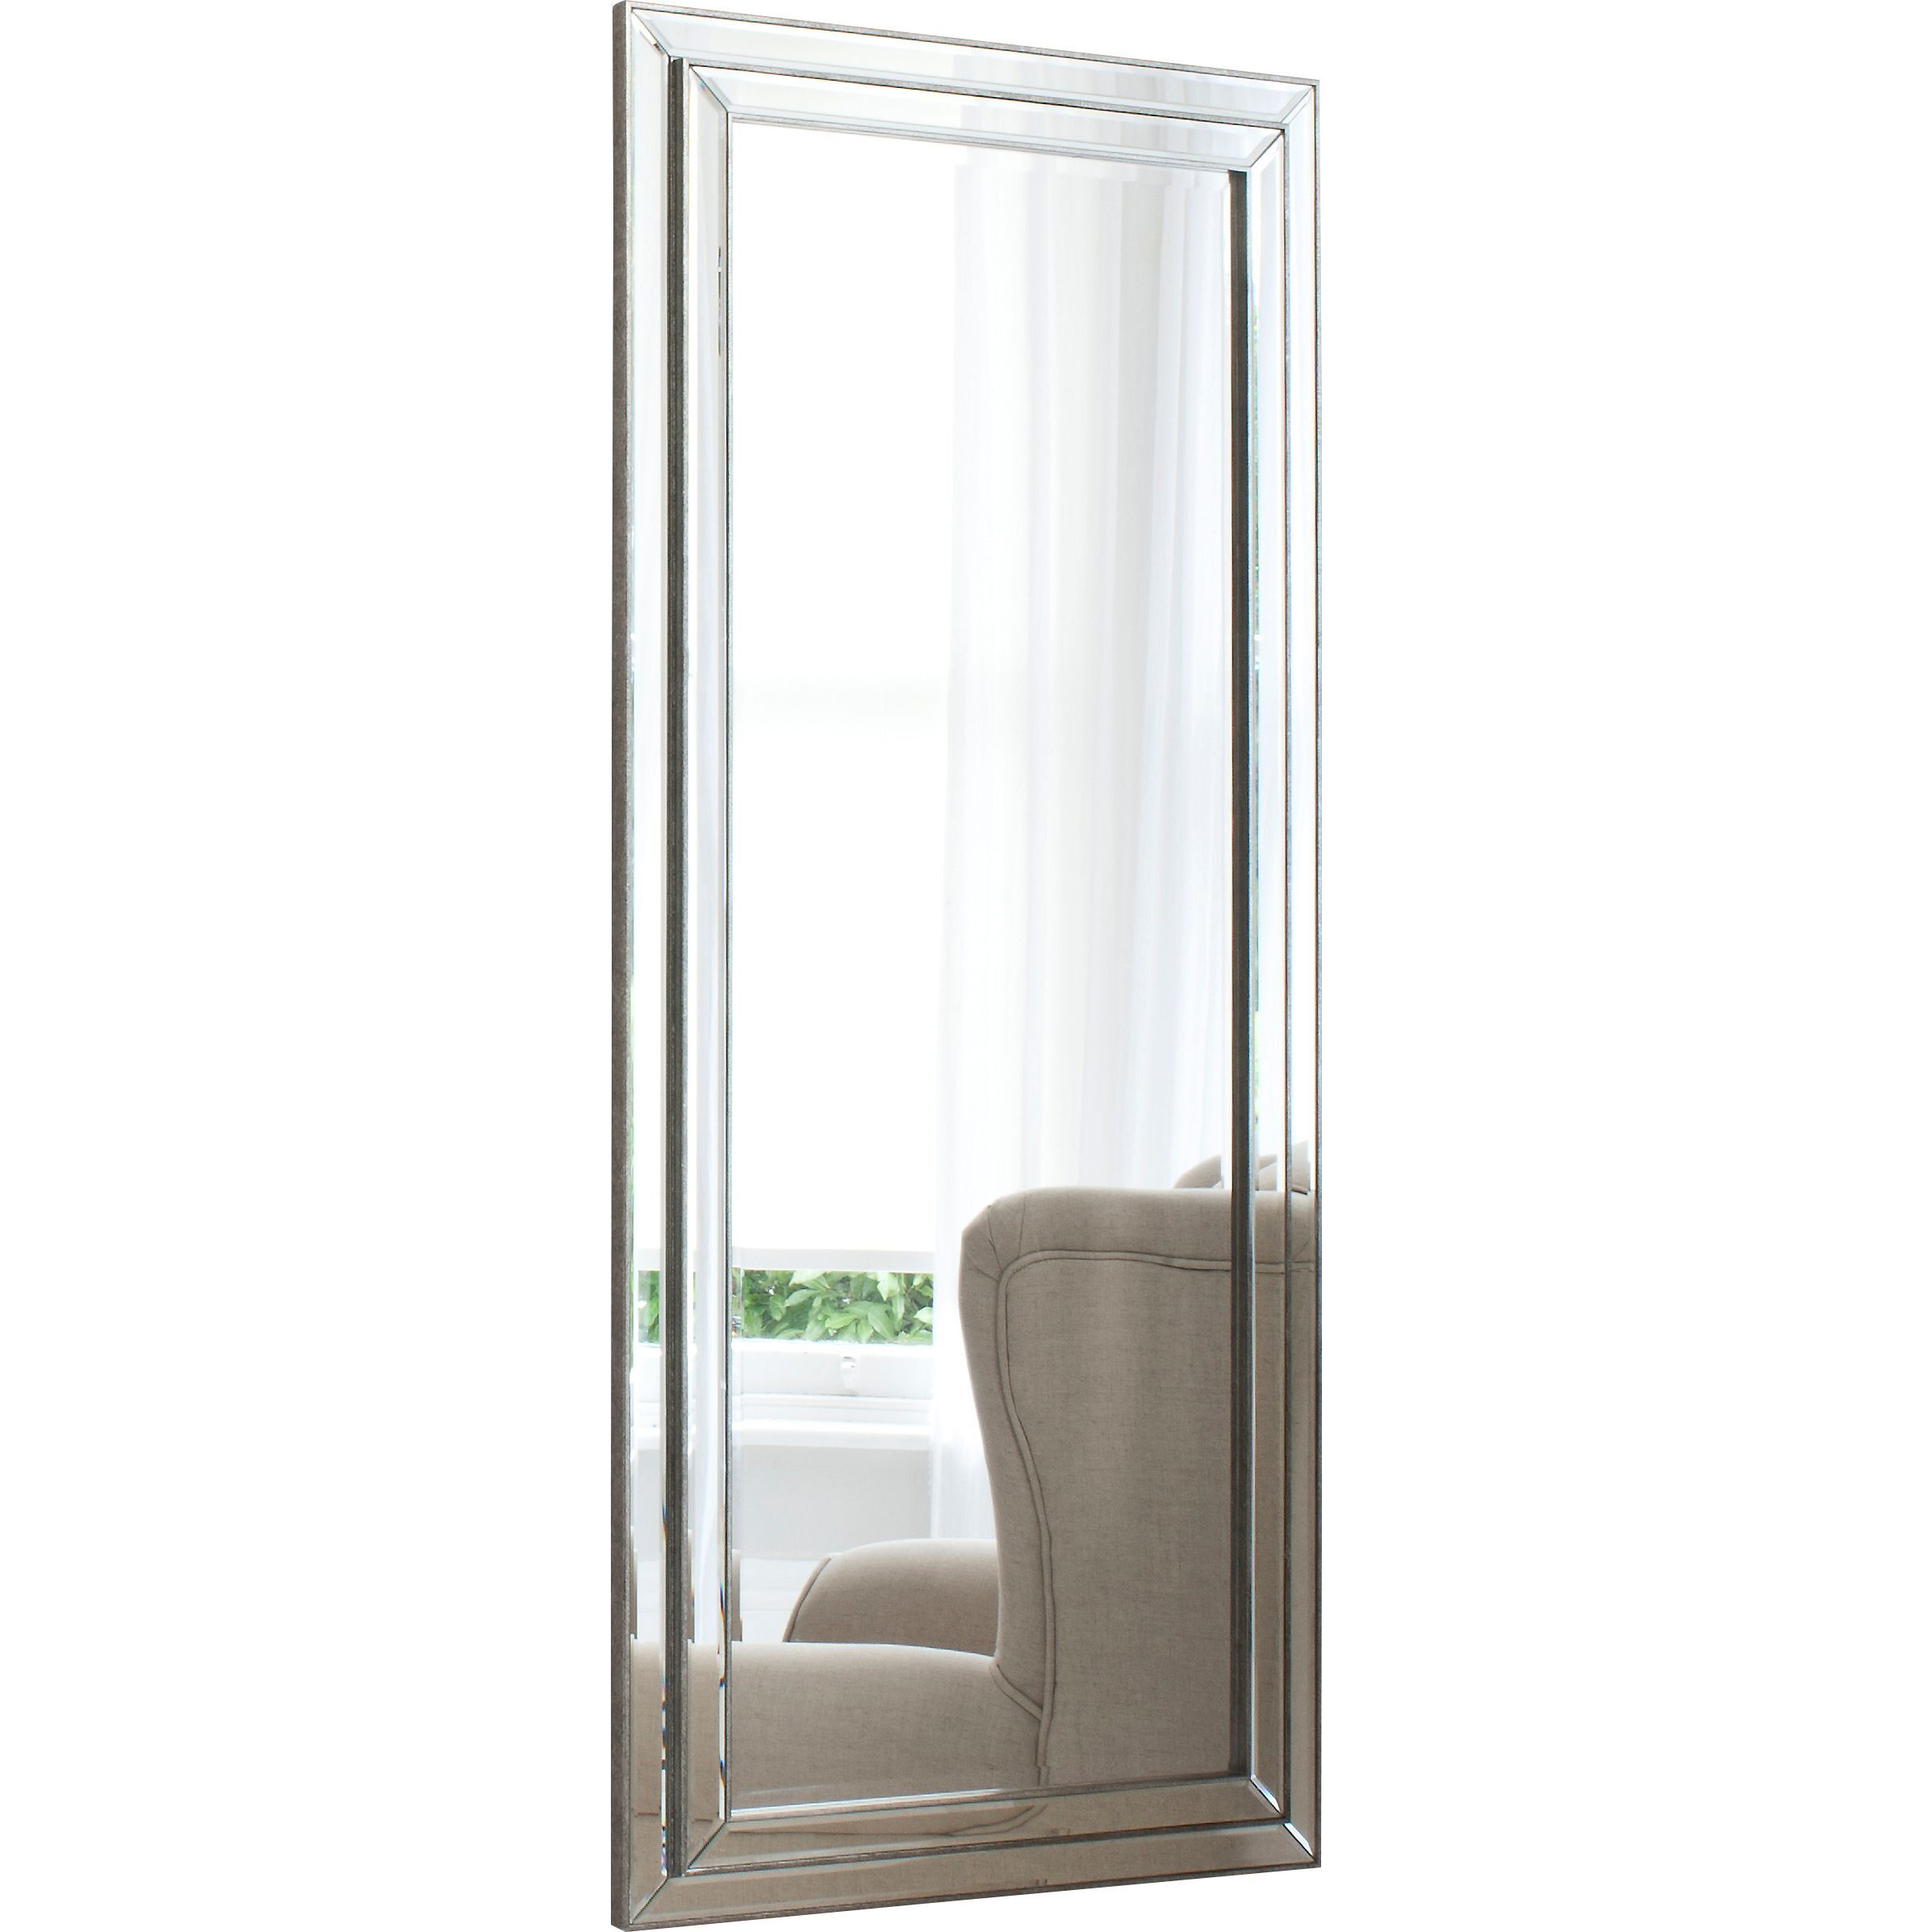 Gallery Direct Chambery Rectangular Bevelled Glass Leaner / Wall Mirror, 155 x 68.5cm, Pewter - image 1